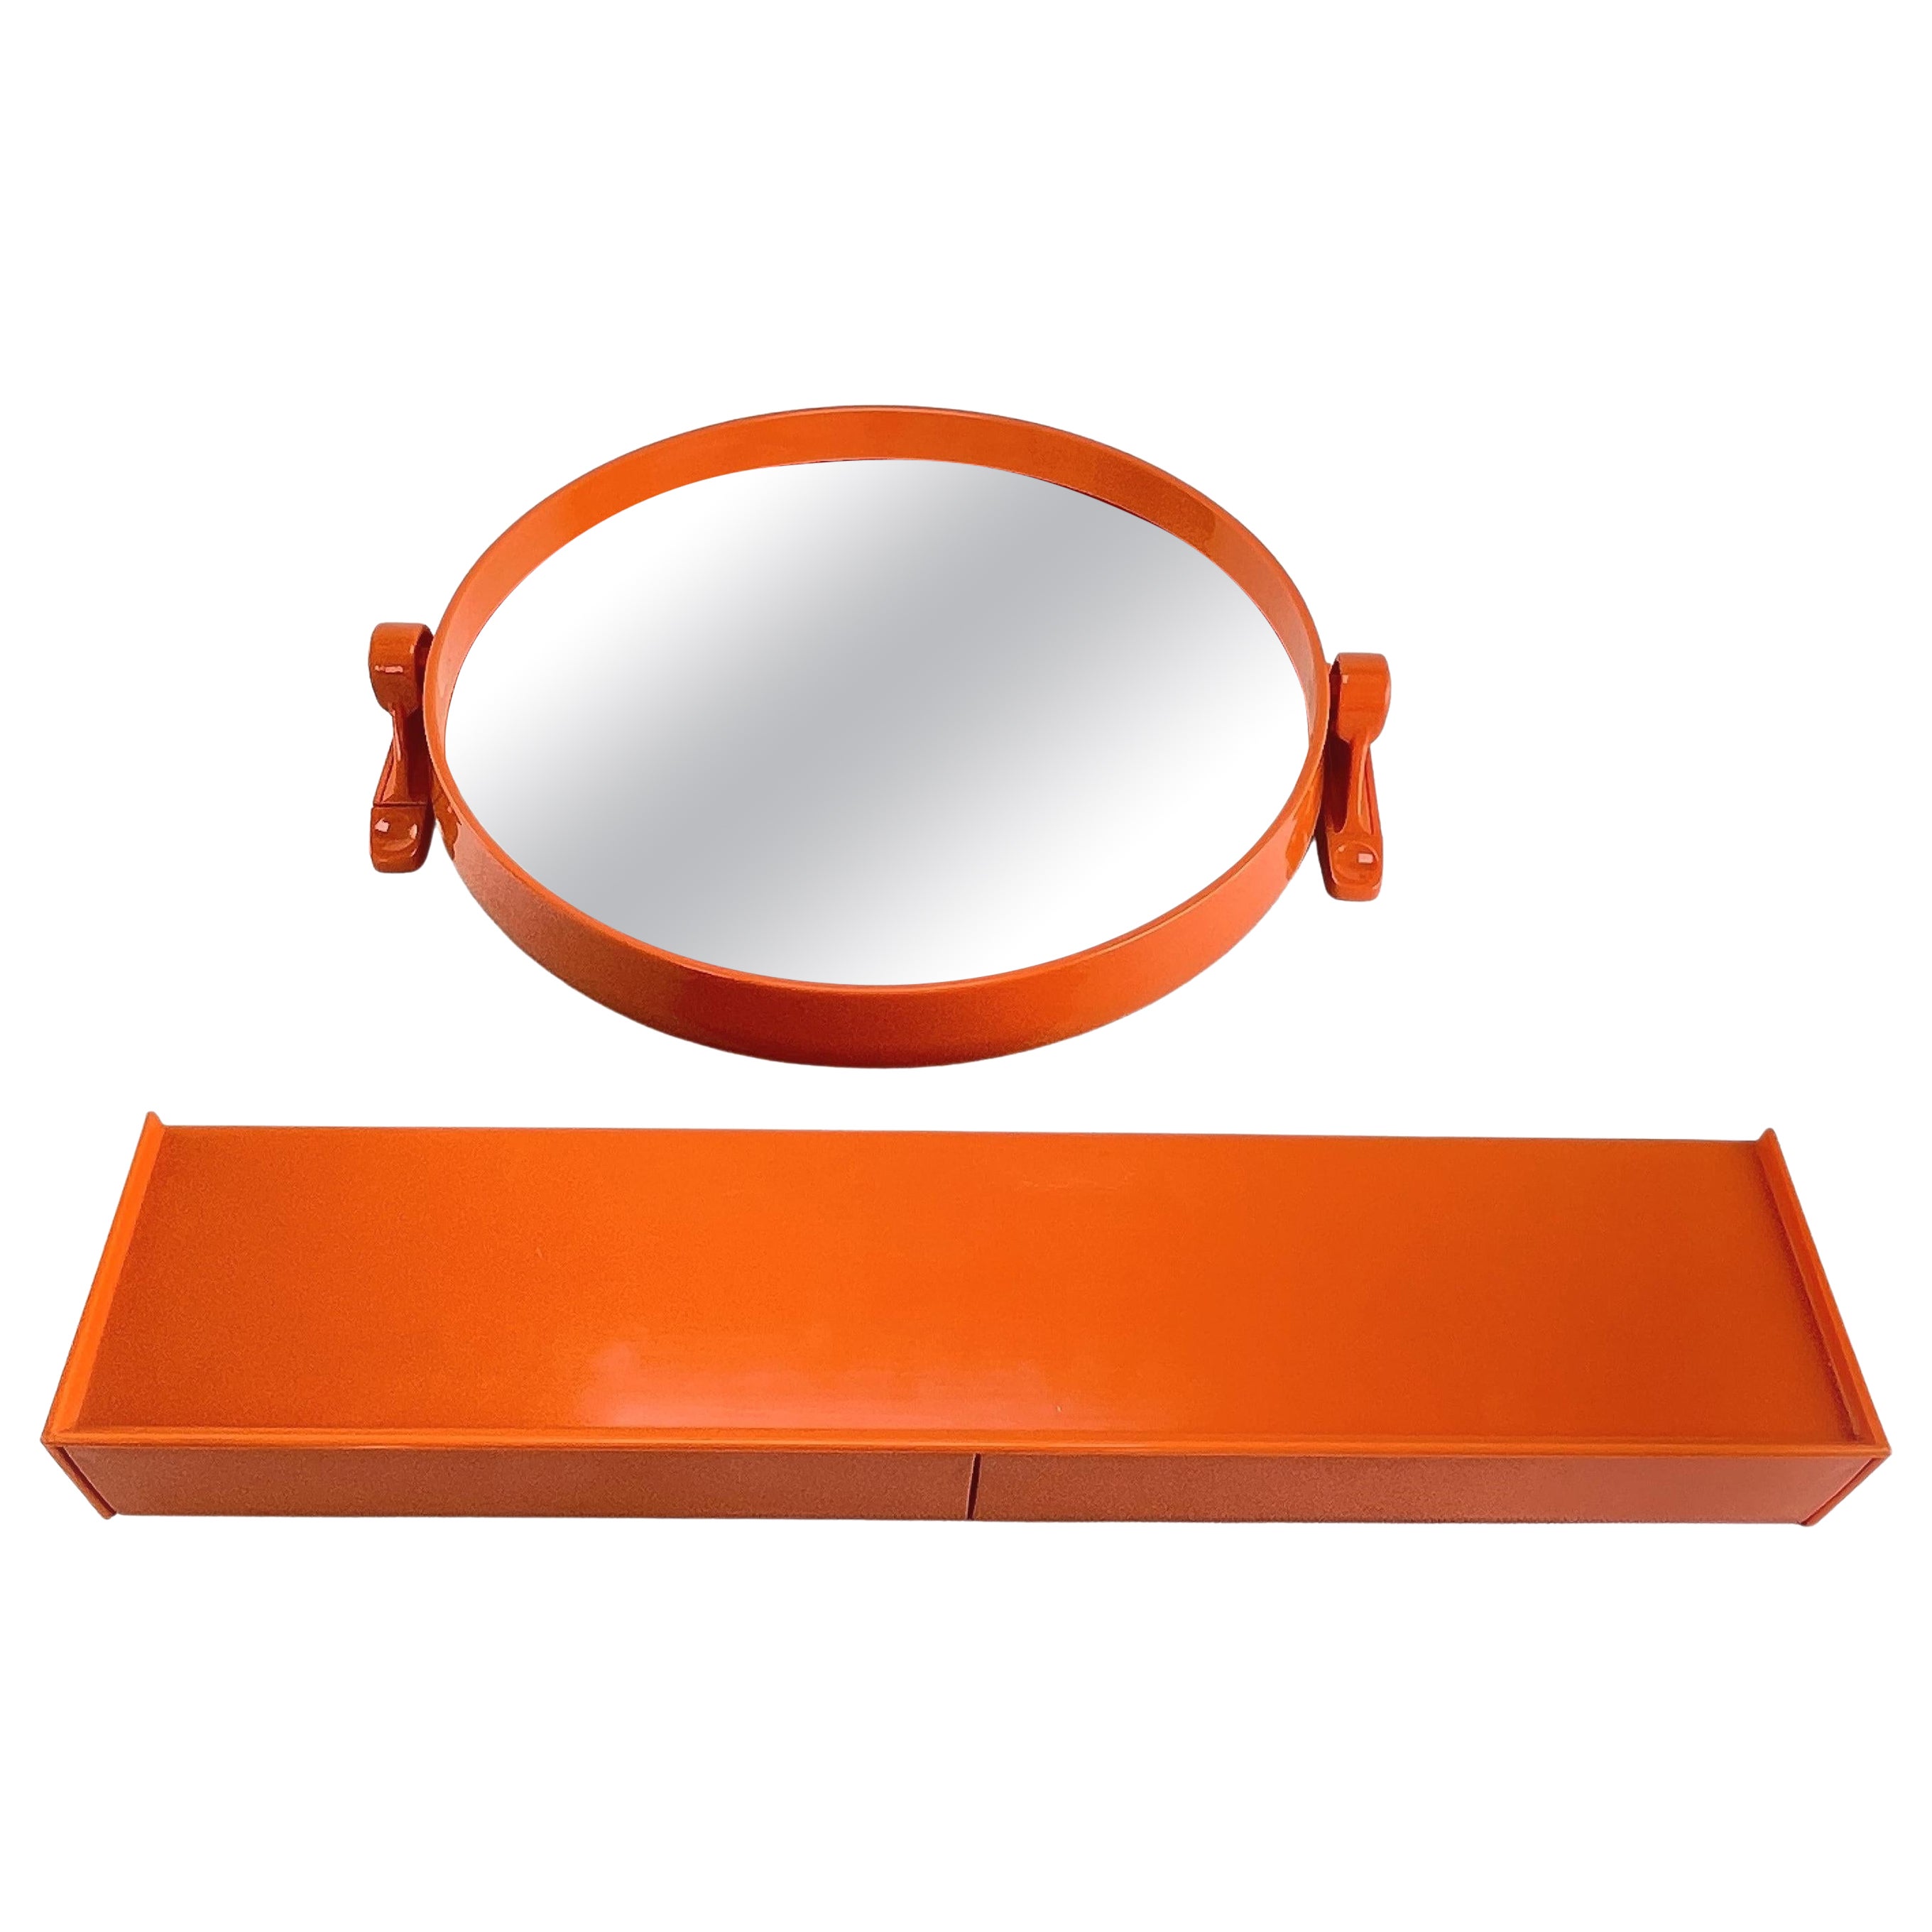 Vintage Wall Mirror with Shelf from Grosfillex France, 1970s